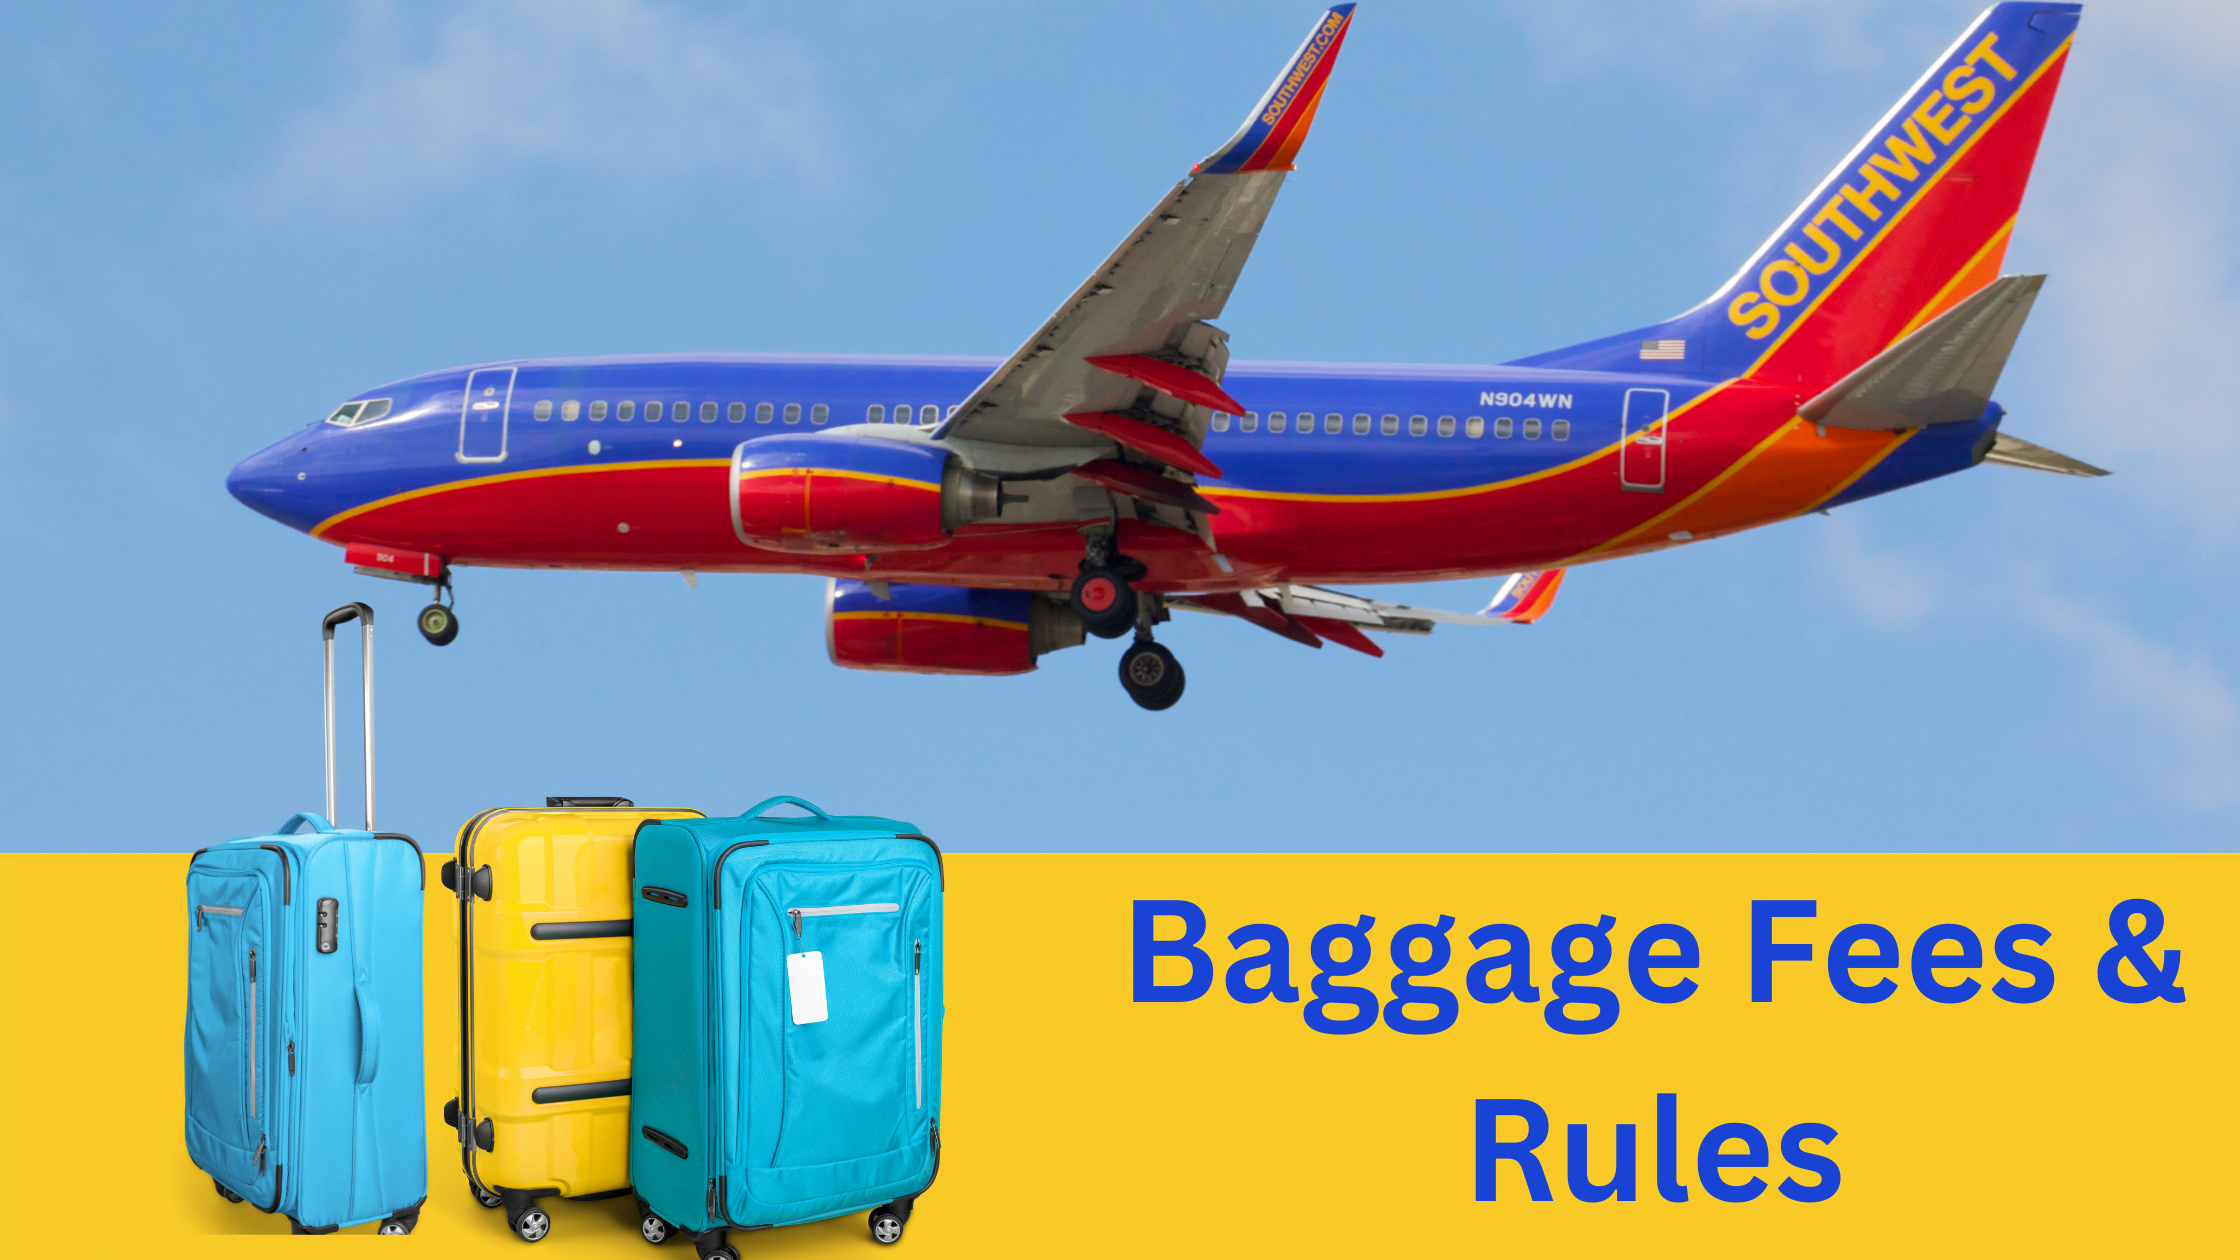 Southwest Airlines Baggage Fees & Rules